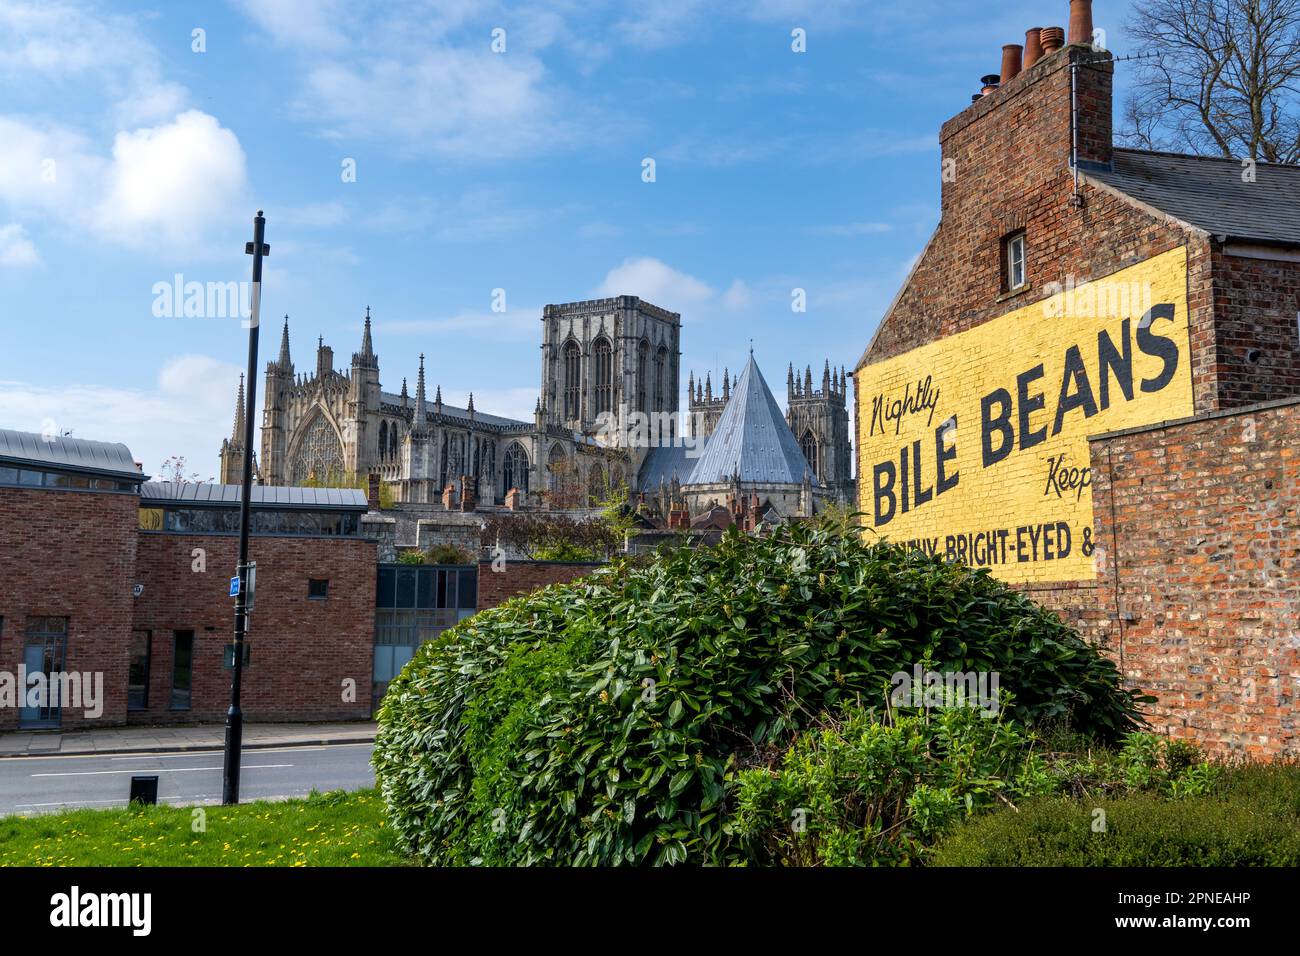 YORK, UK - APRIL 17, 2023. The famous Bile Beans vintage advertisement sign with York Minster in the background Stock Photo